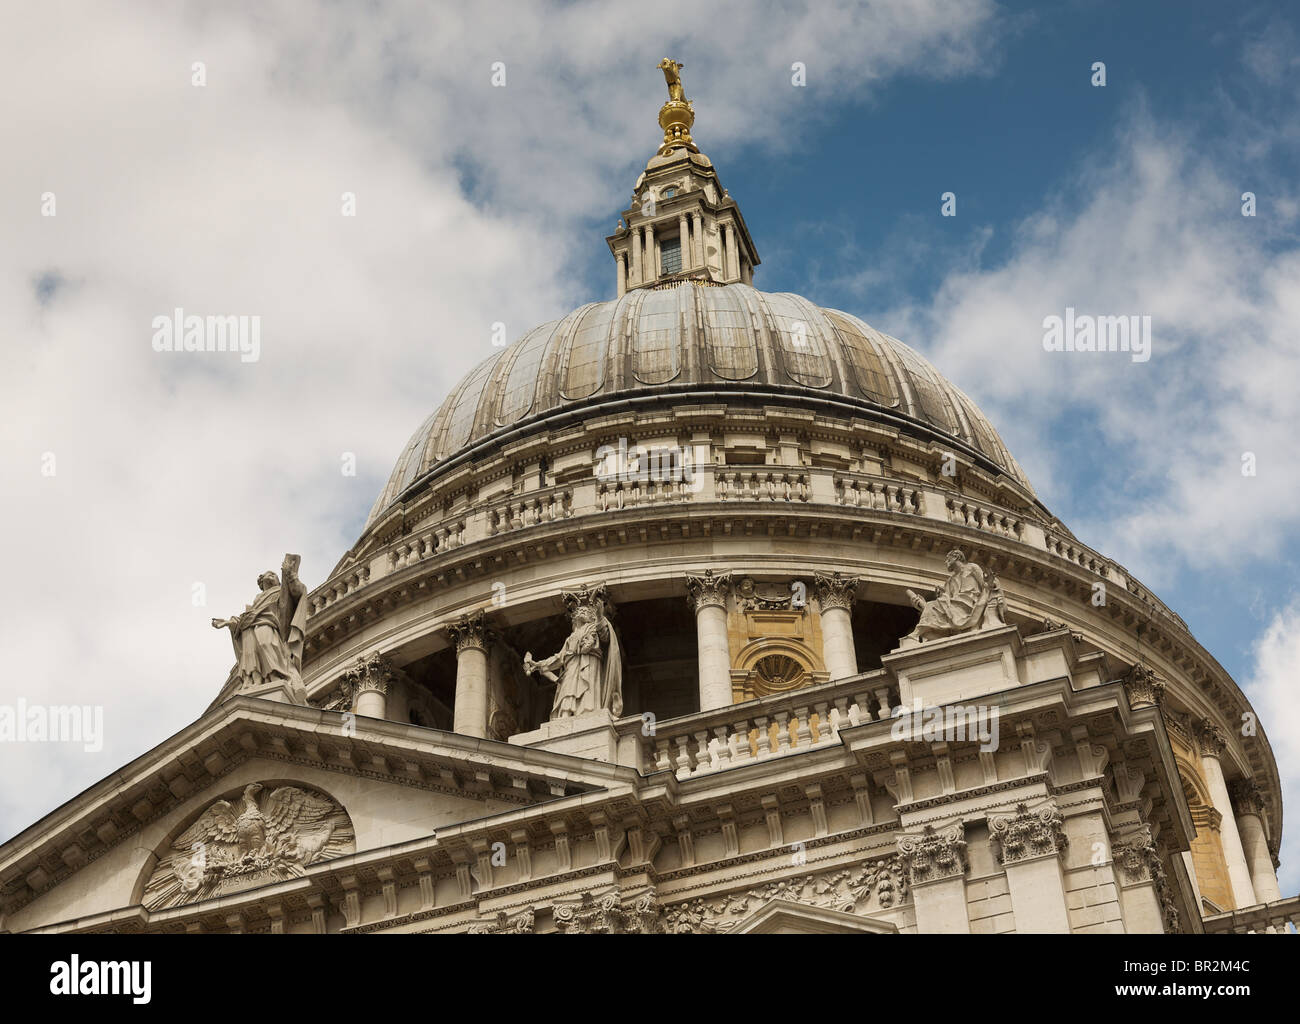 Dome of St Paul's cathedral, London Stock Photo